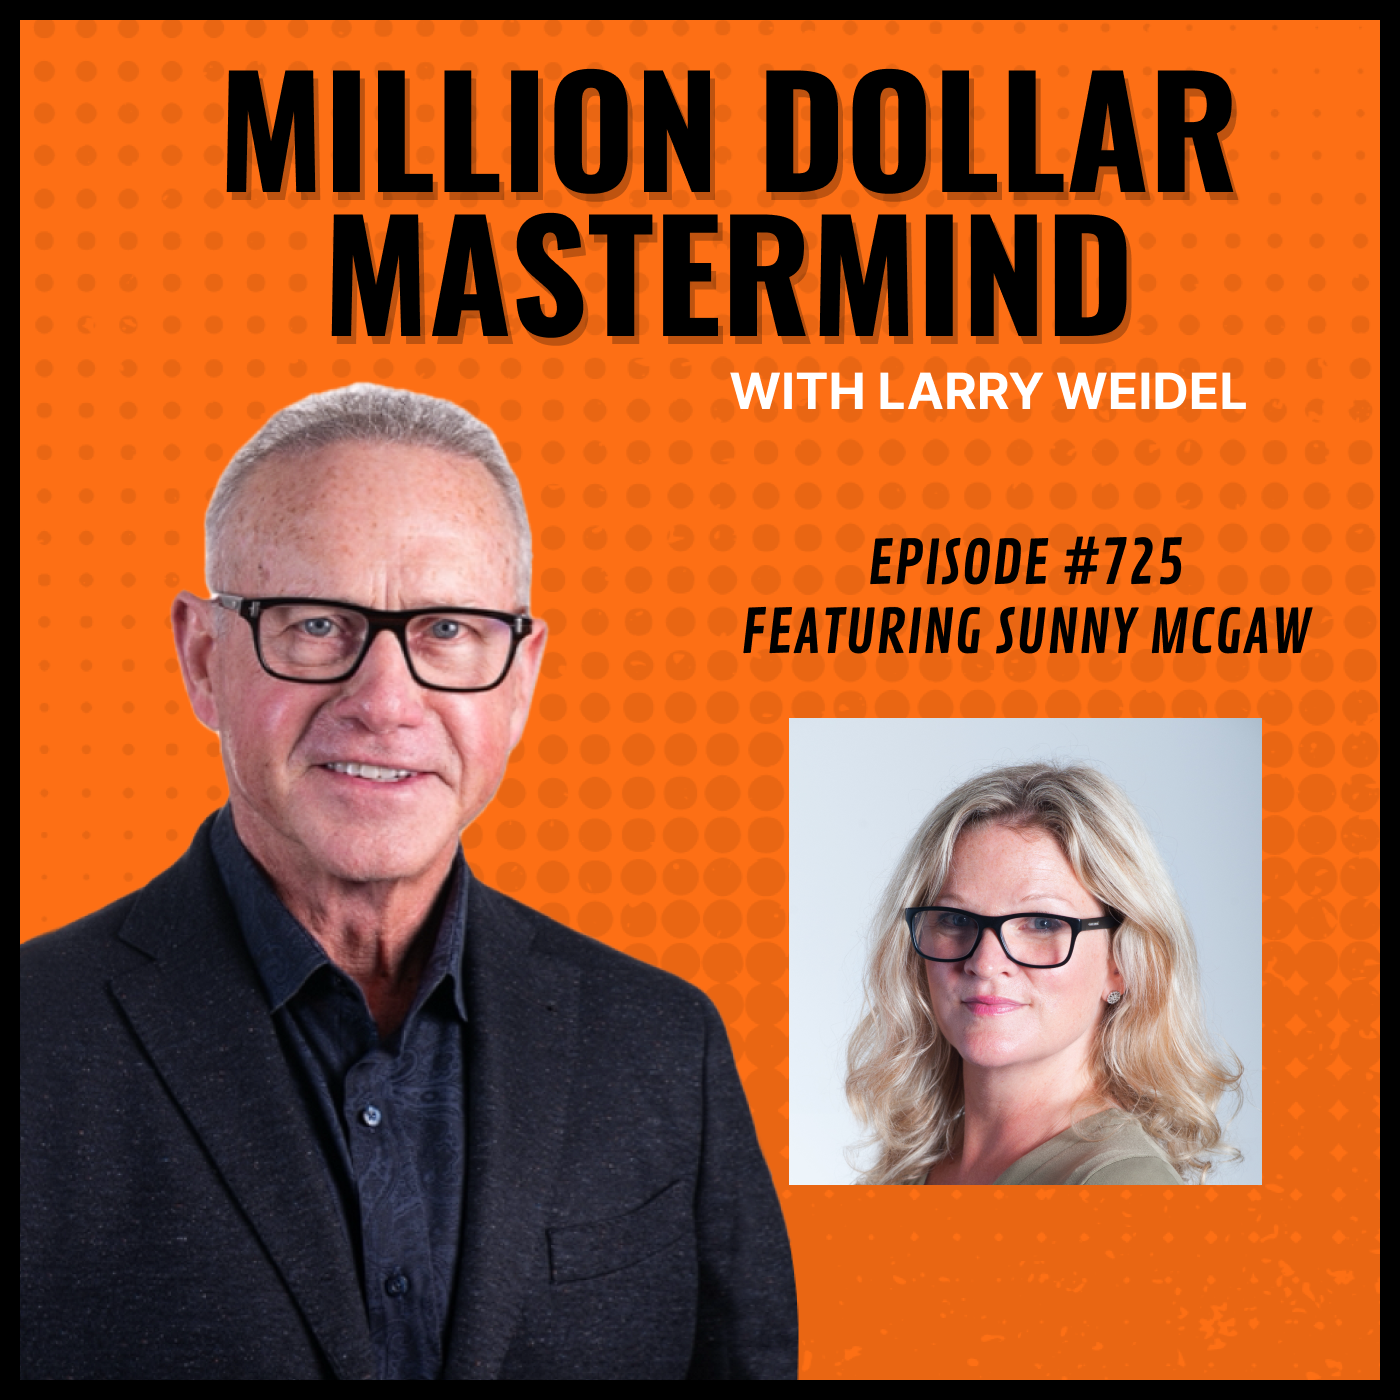 Episode #725 - A Marketer With A Heart with Sunny McGaw, Marketing Entrepreneur & Founder